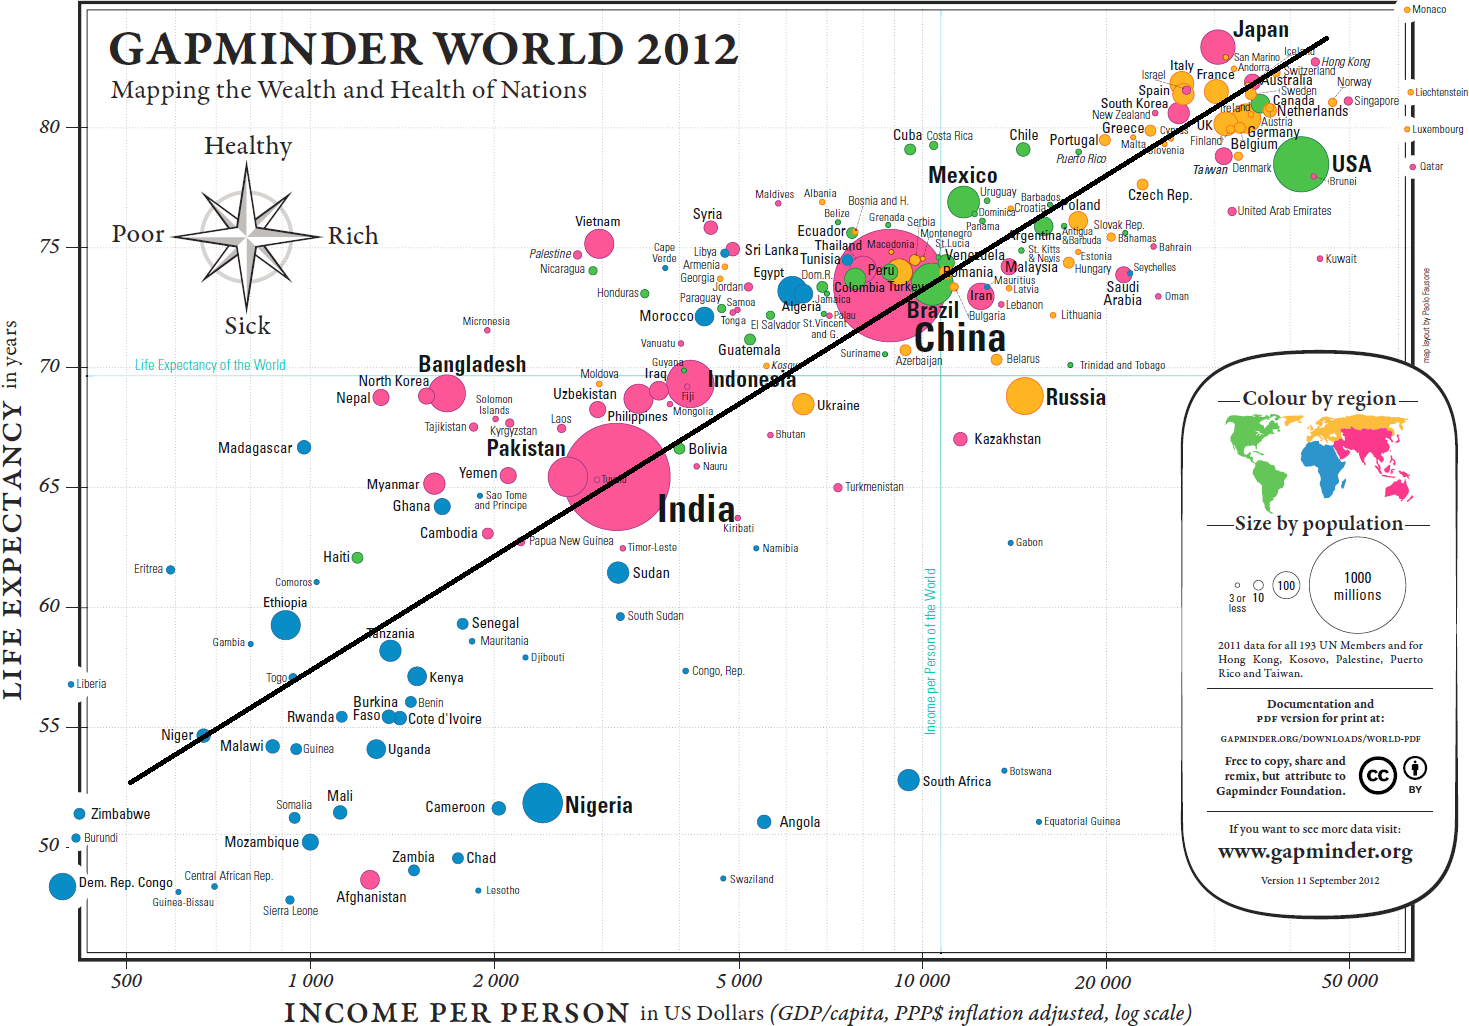 Approximate line of best fit for the Gapminder chart.